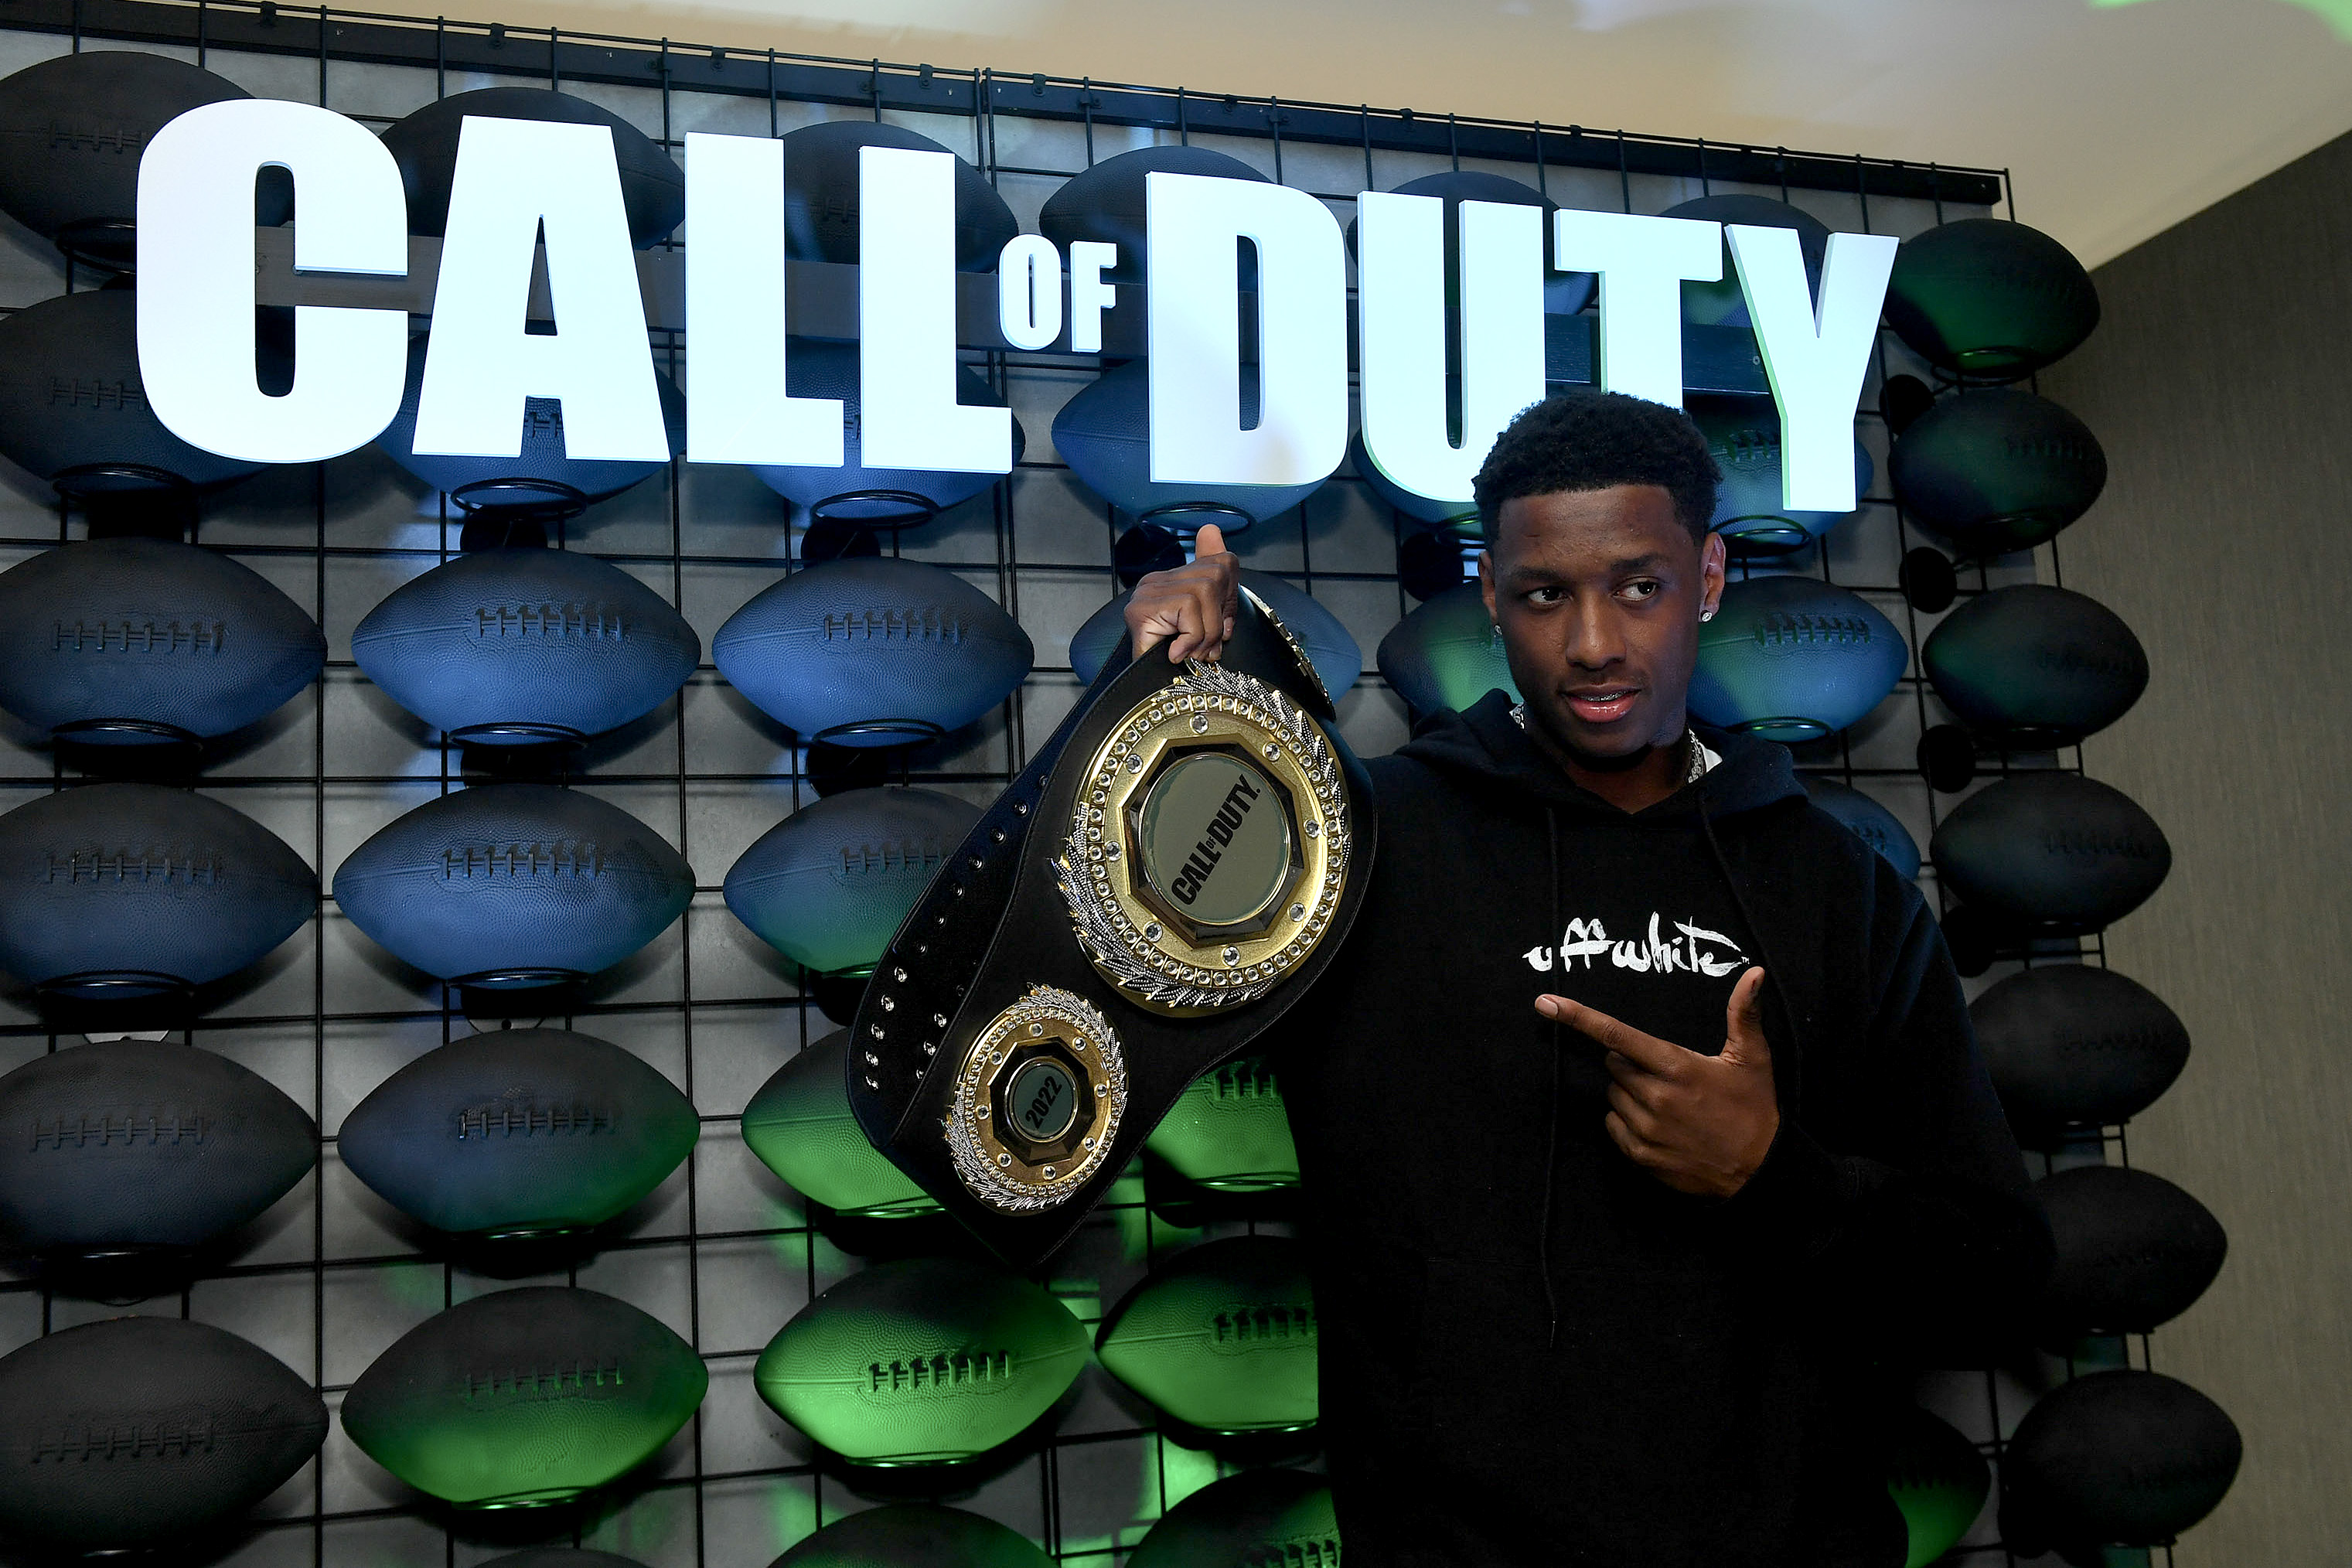 NY Jets Sauce Gardner Is The Best Call of Duty Player In The NFL